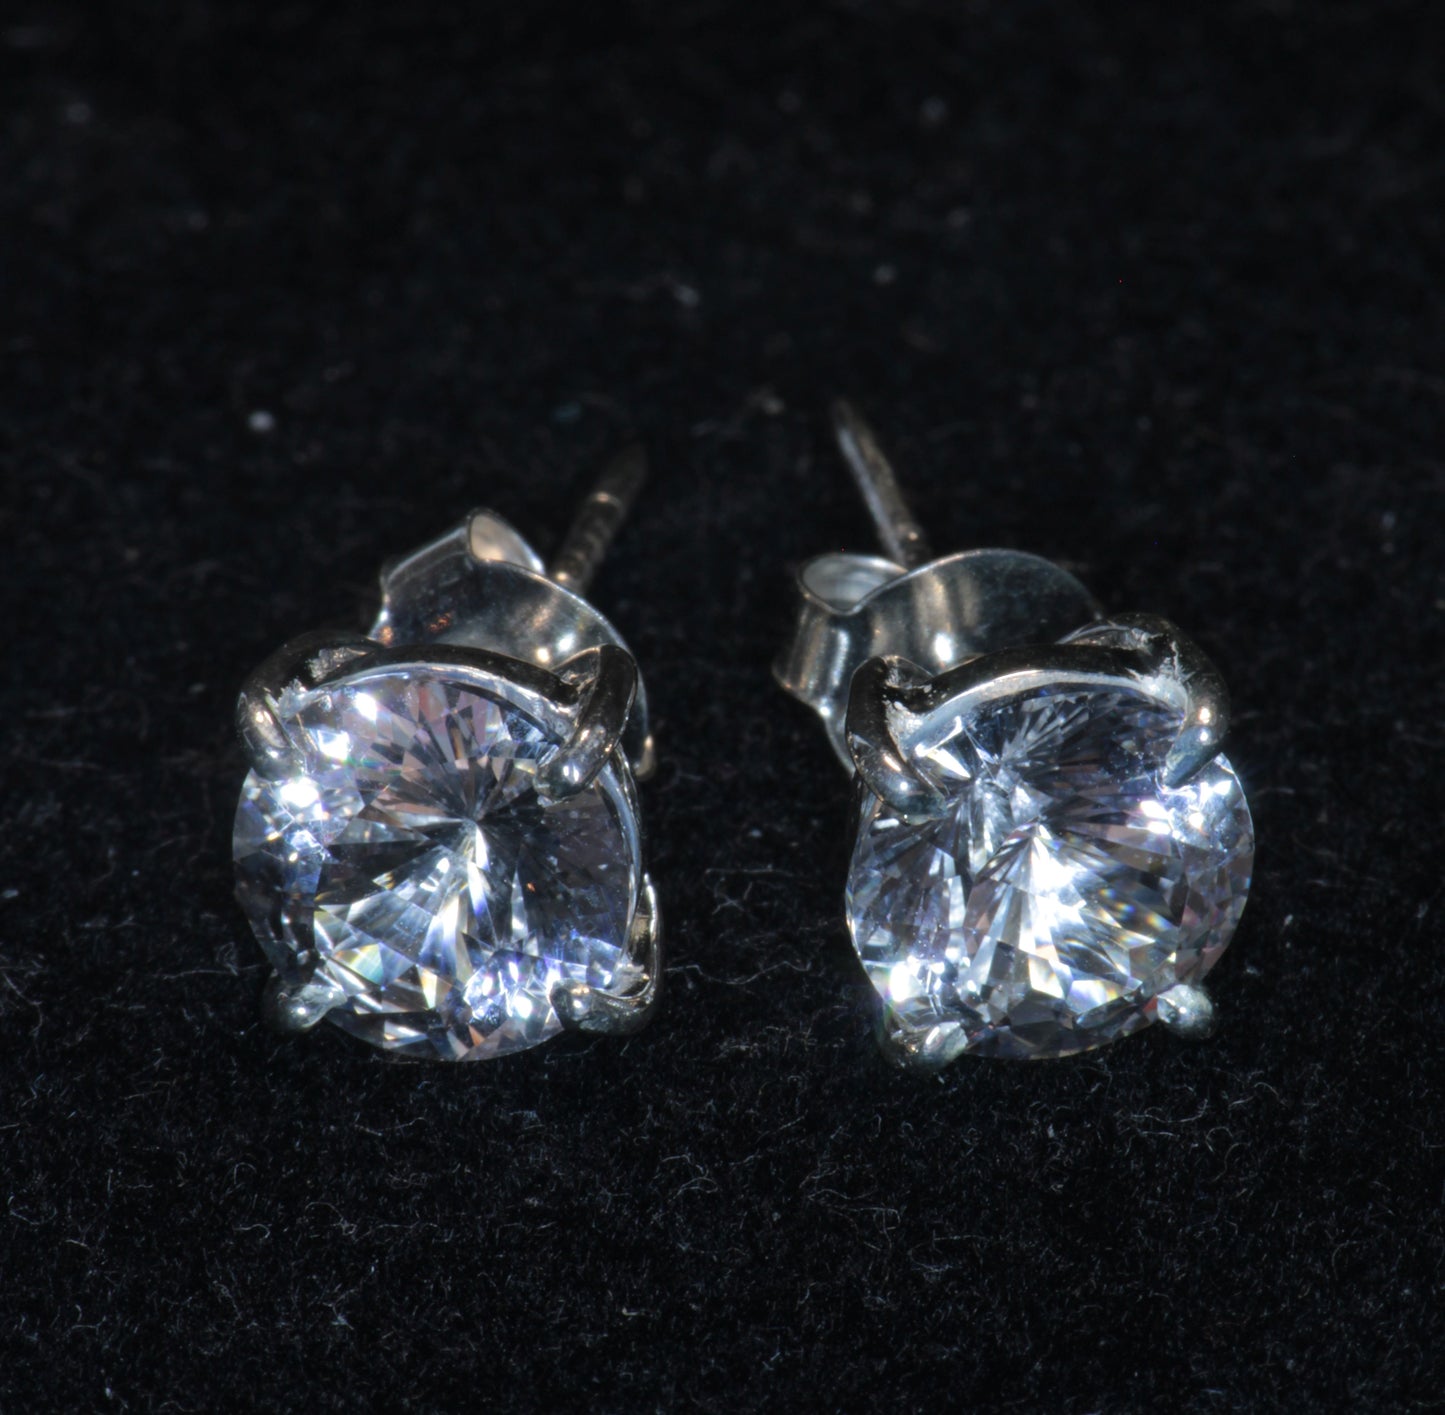 EOTS Cut F-35 Window and Round Cut Sapphire Earrings in Sterling Silver